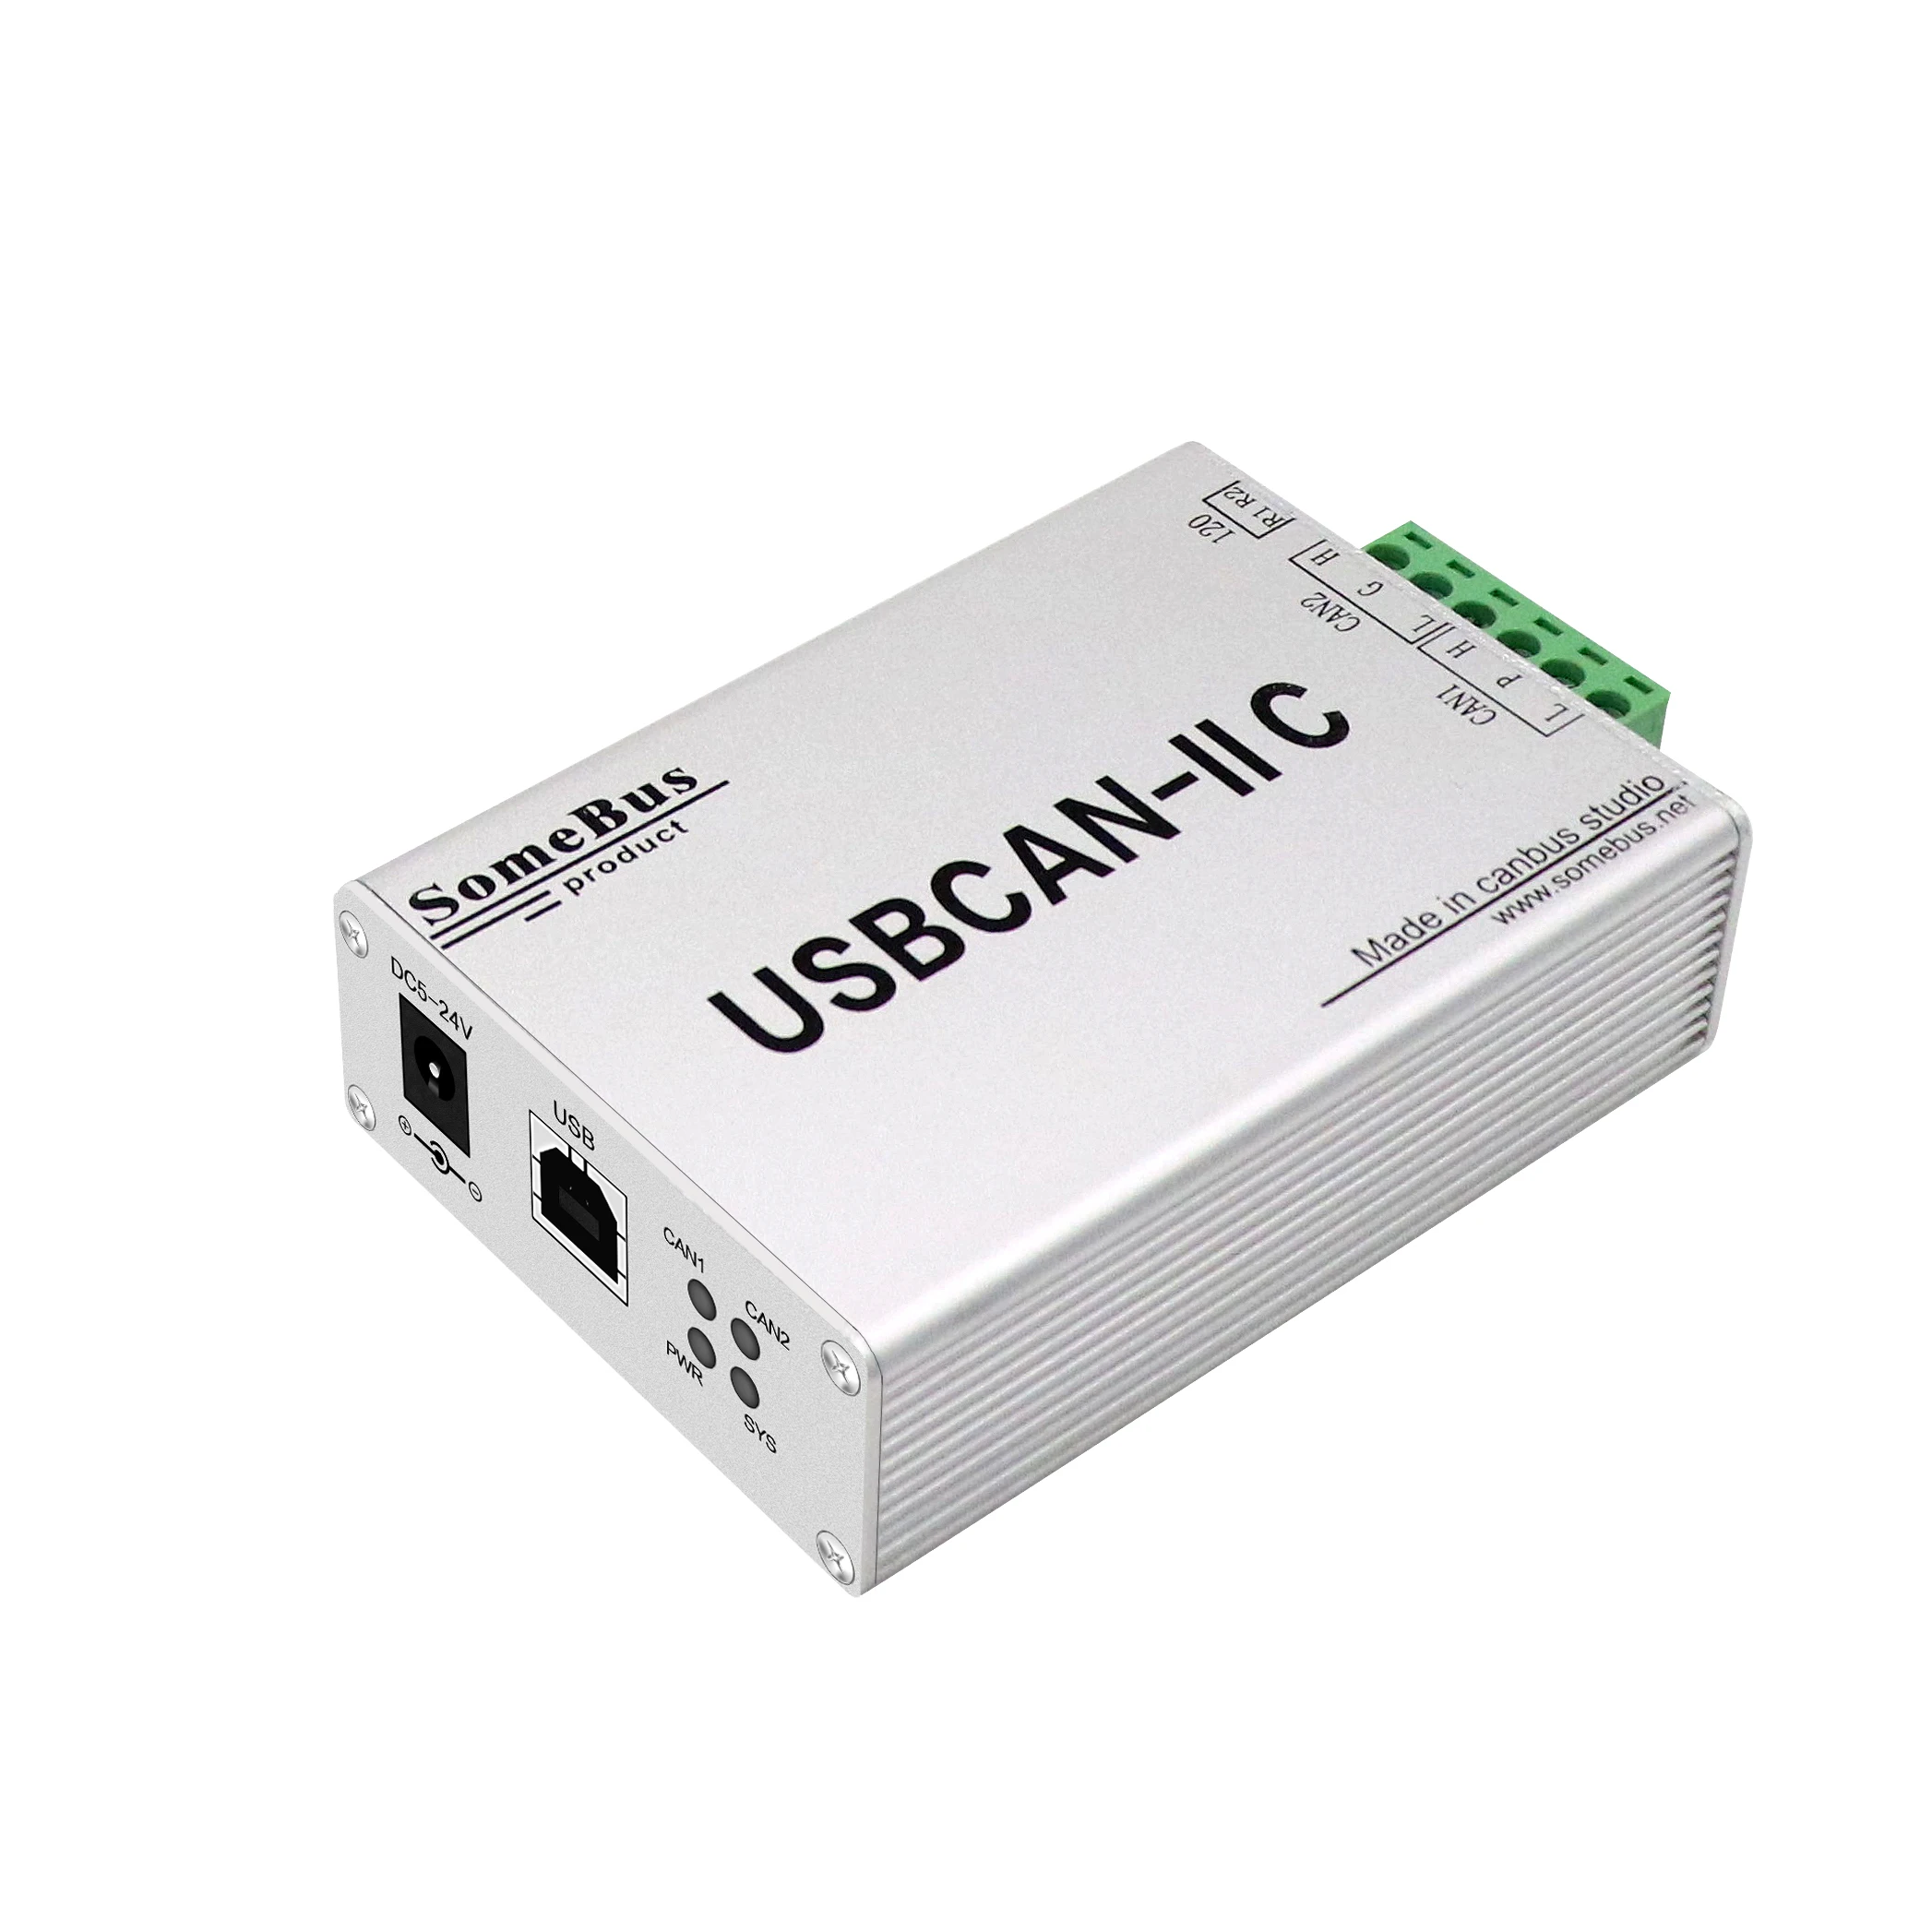 USB to CANBUS Converter Analyzer CAN to USB Communication Module Industrial Debugger Box CAN Bus to USB